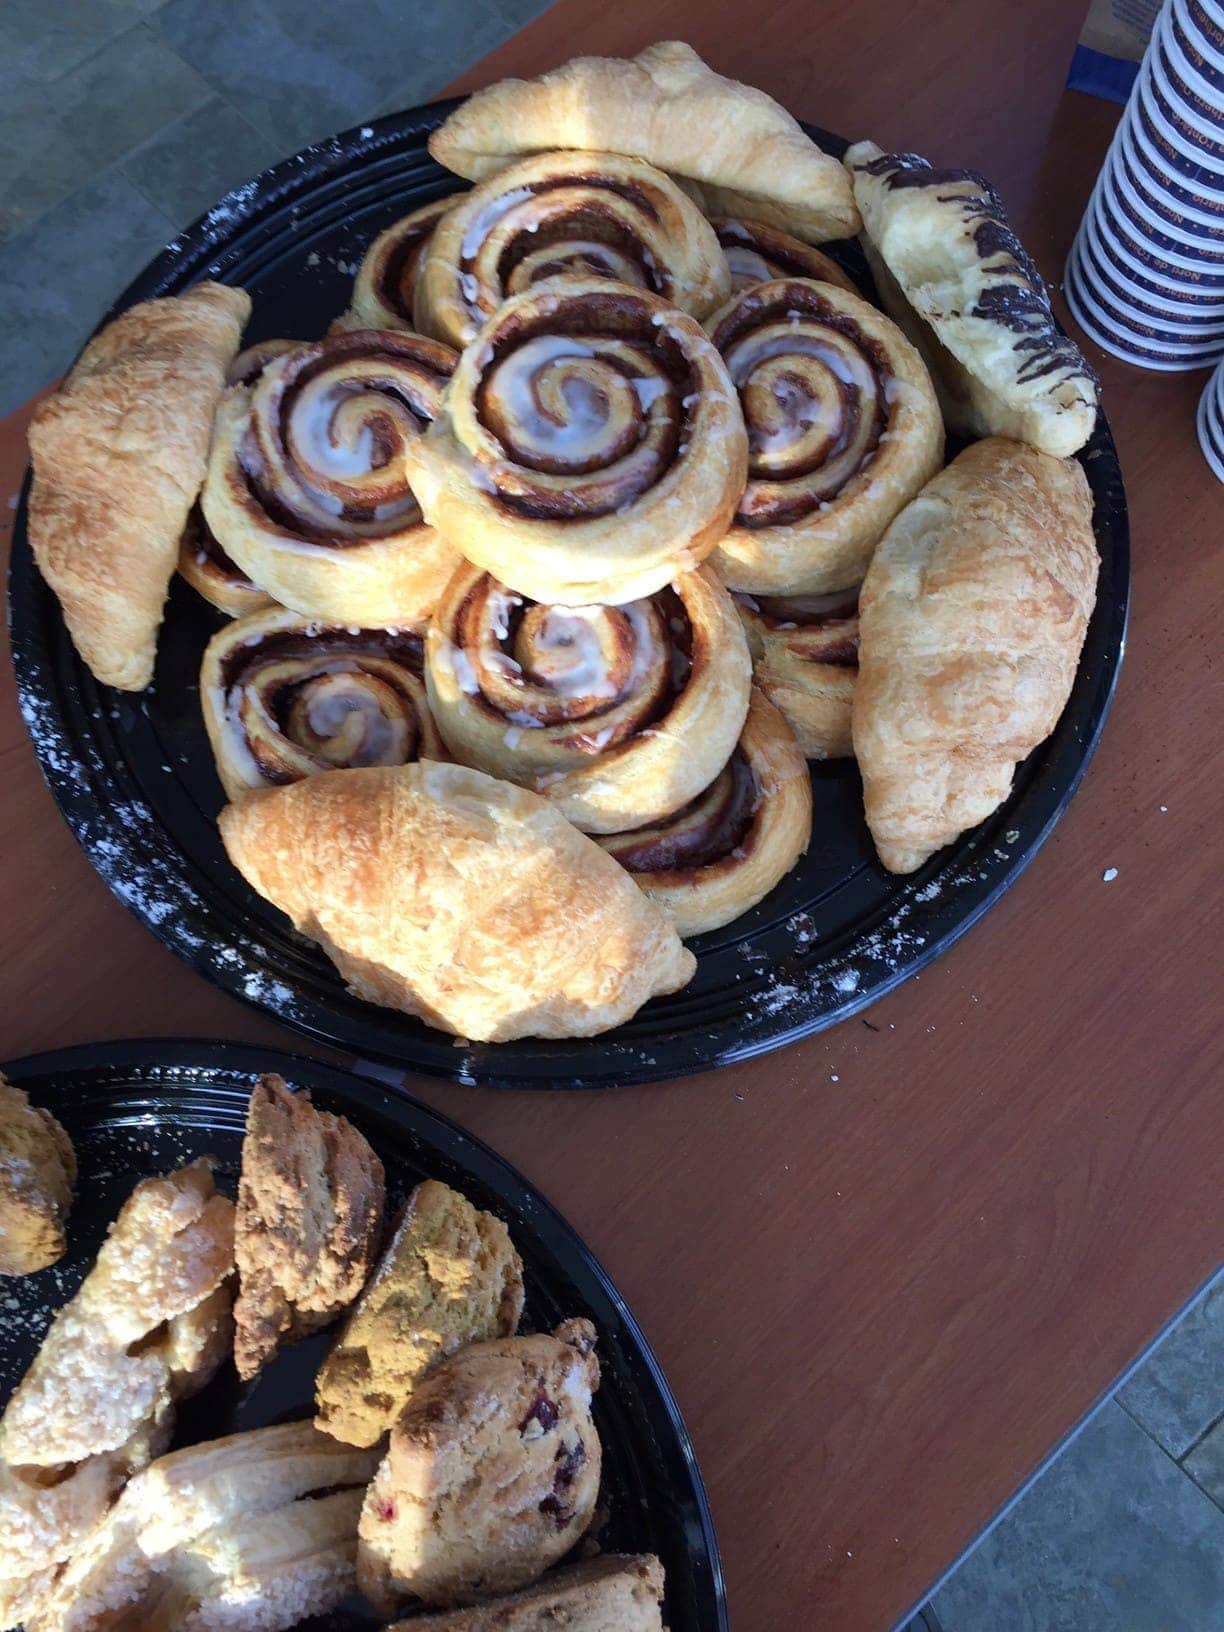 Old Rock Catering Services (Cinnamon Rolls)